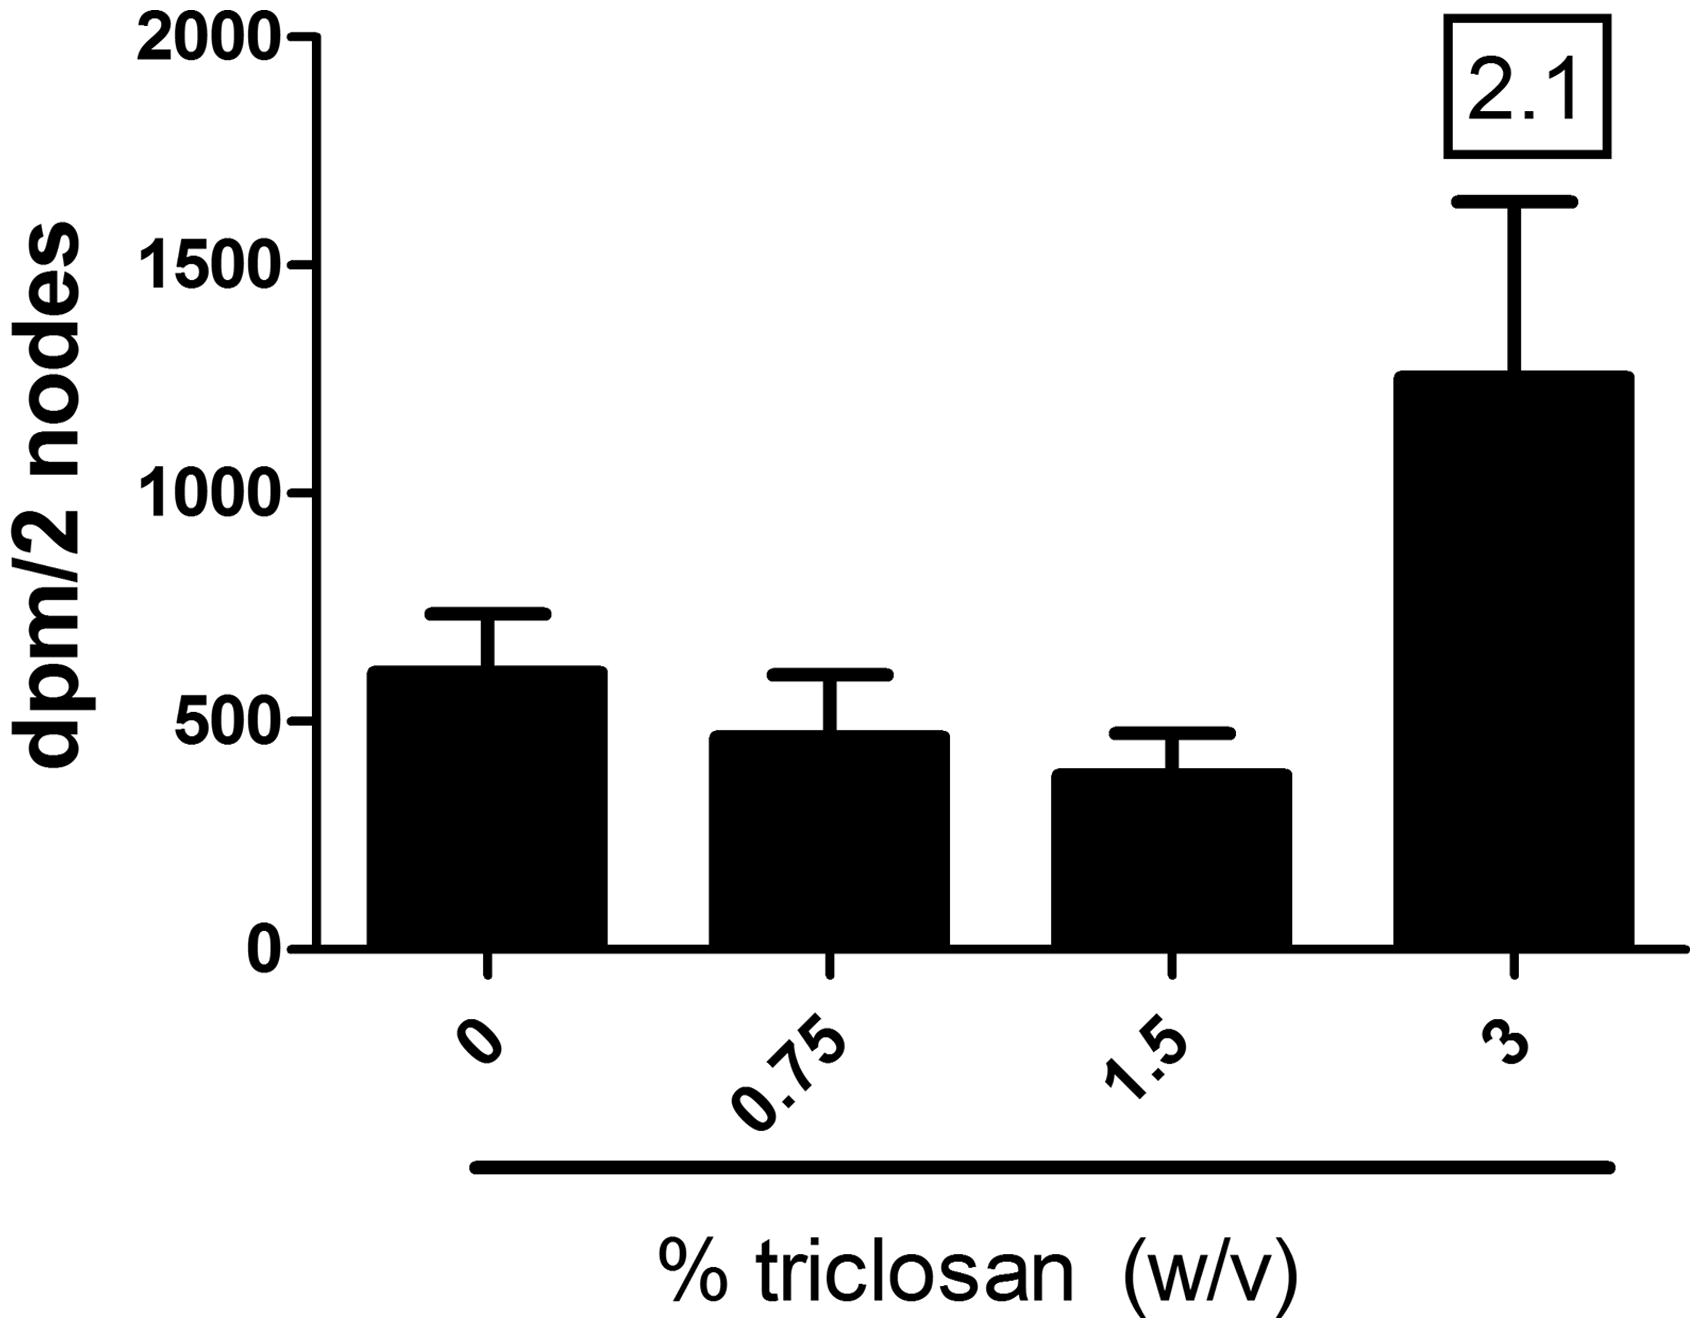 Figure 2. Allergic sensitization potential after dermal exposure to triclosan. Analysis of allergic sensitization potential of triclosan using LLNA. Disintegration per minute (DPM) represent [3H]-thymidine incorporation into draining lymph node cells of BALB/c mice following exposure to vehicle or concentration of triclosan (0.75–3.0%). SI value is stimulation index (fold-change over vehicle control). Bars shown are means (±SE) of five mice per group.